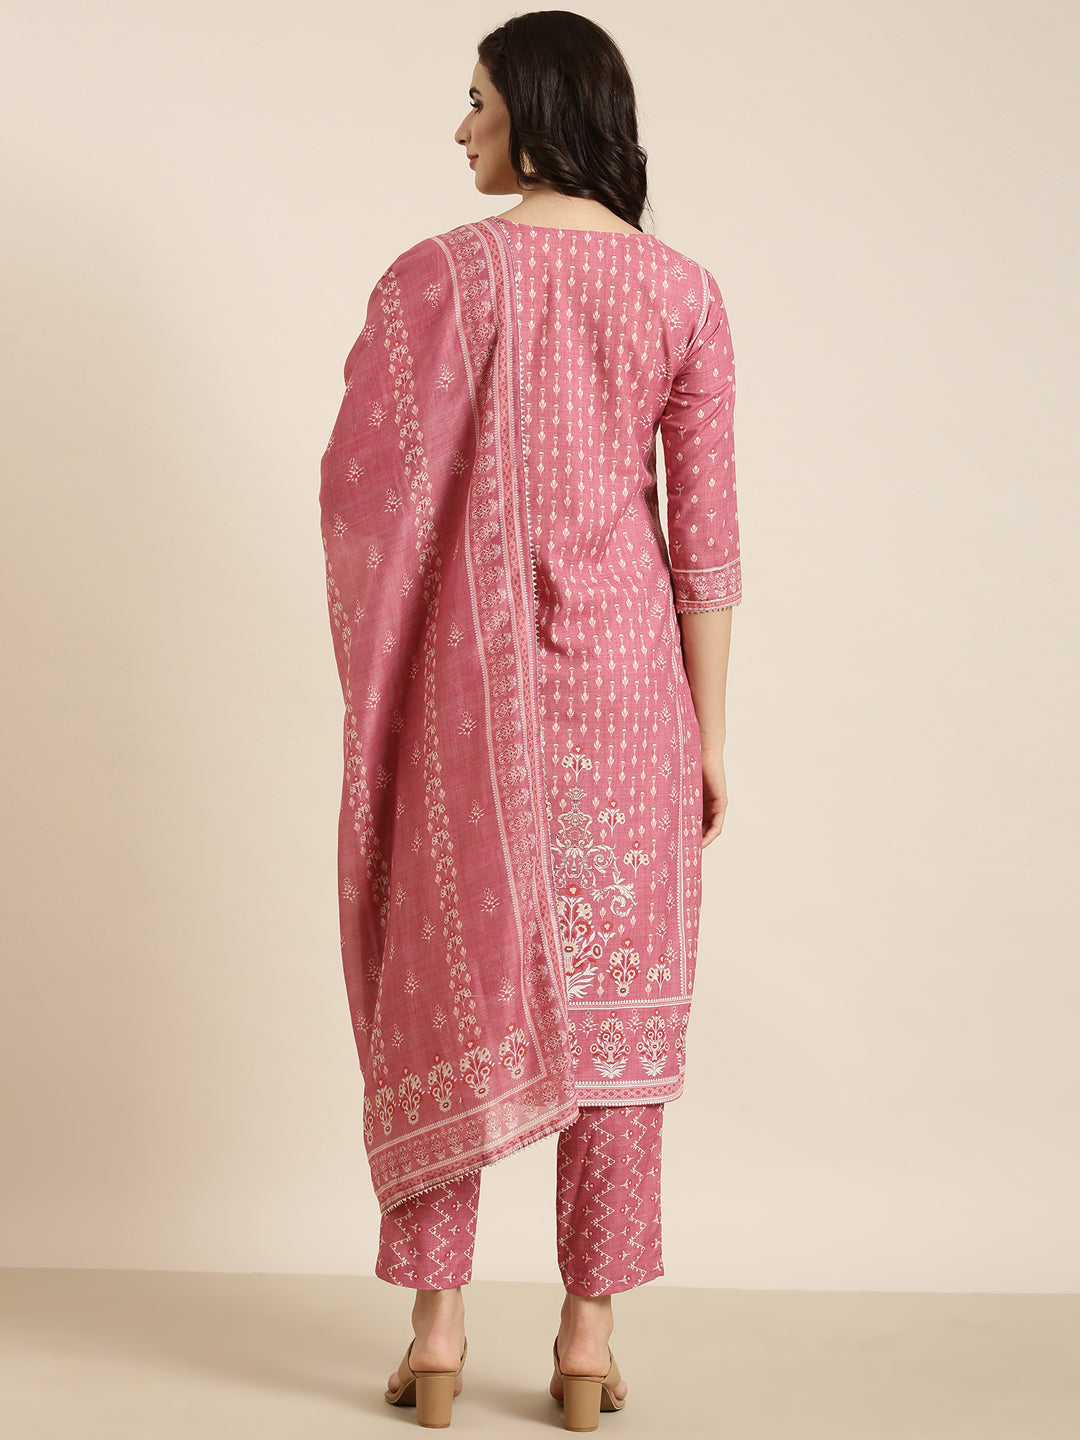 Women Straight Pink Ethnic Motifs Kurta and Trousers Set Comes With Dupatta